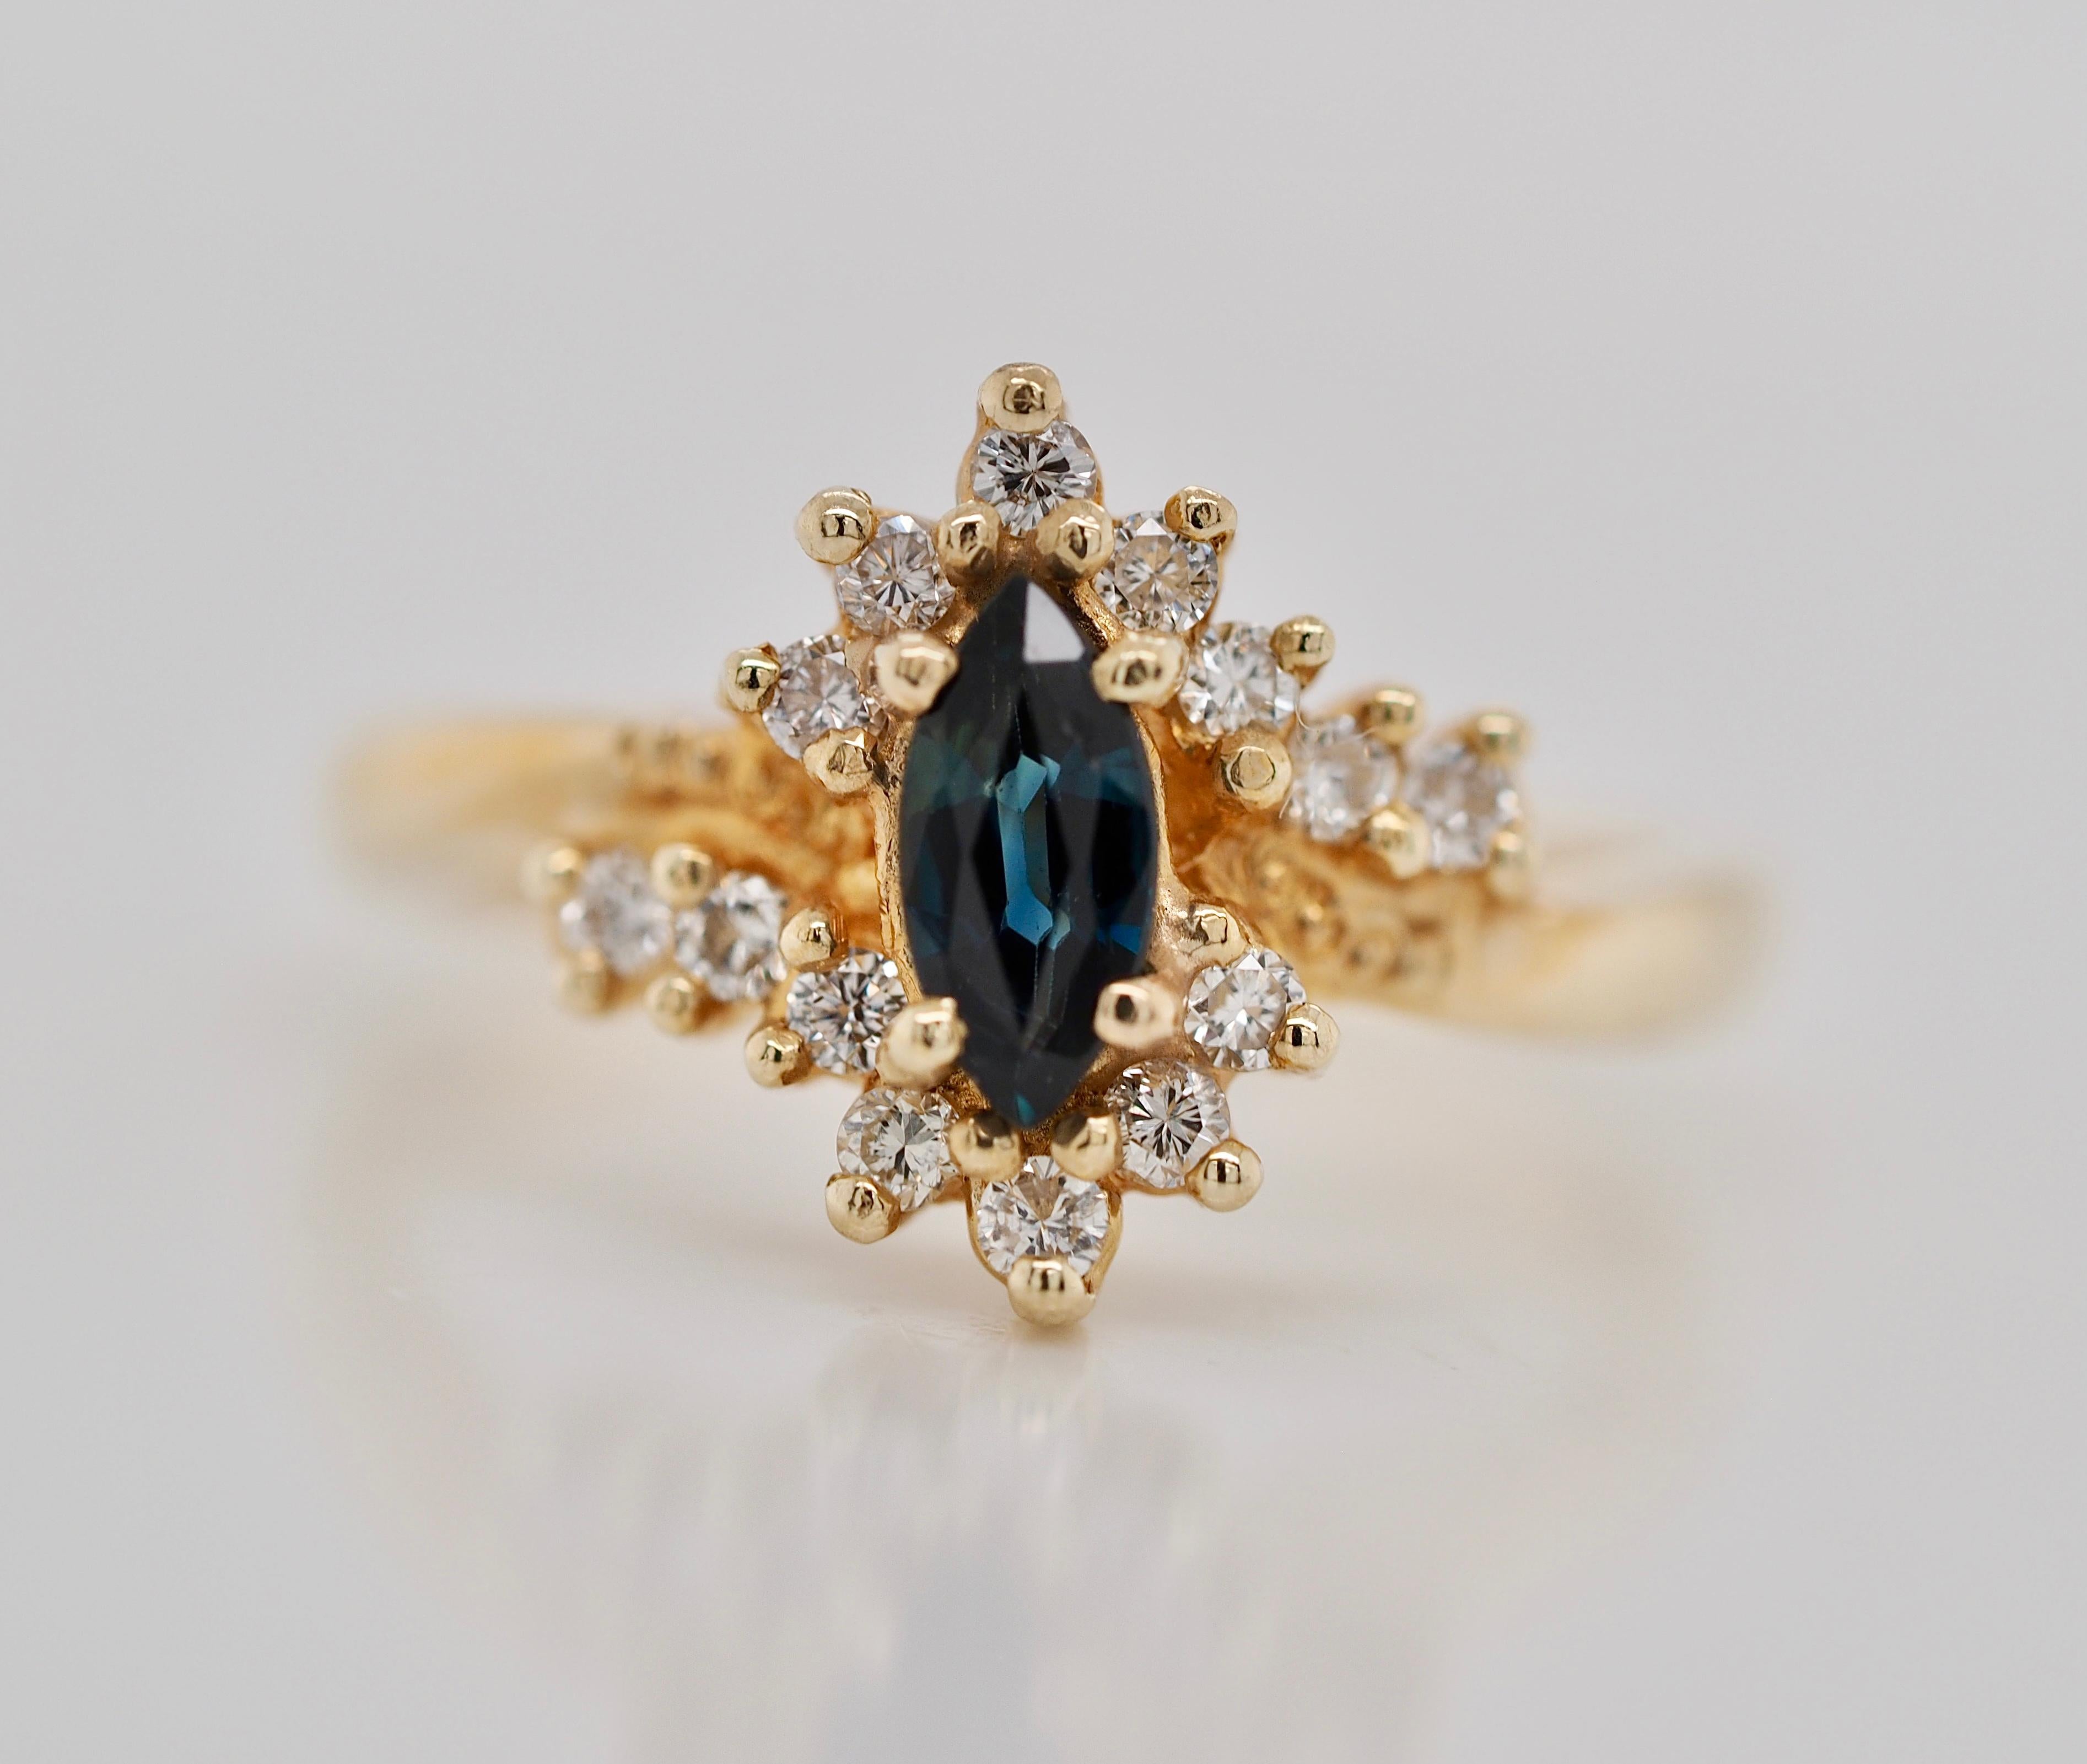 A retro ring is always the perfect accessory. This bright blue marquise sapphire is accented with a starburst of brilliant round diamonds. It is such a precious ring you can layer or wear on its own bringing so much life!
It can be sized up or